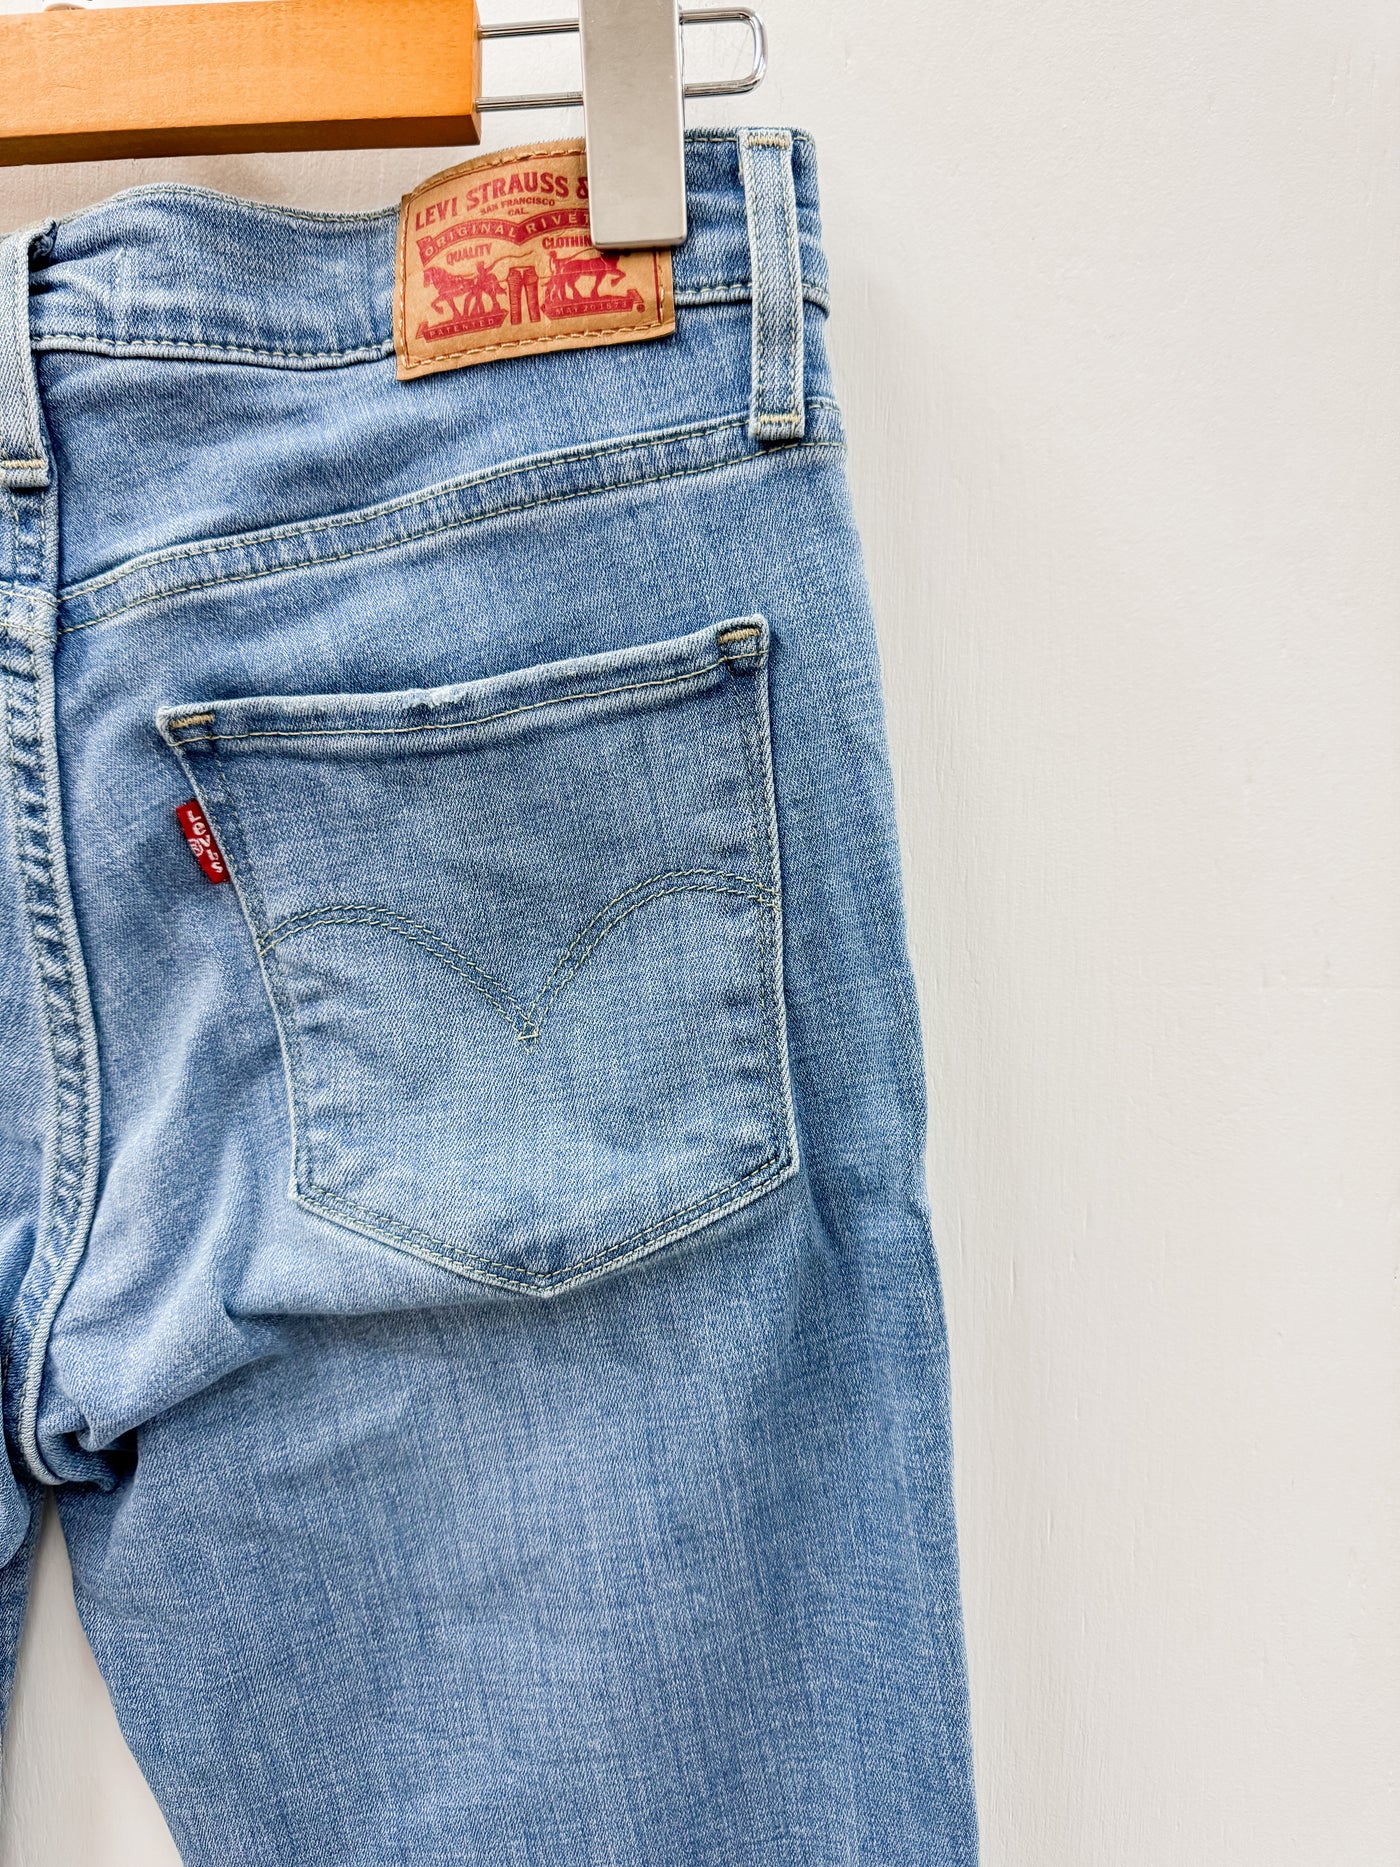 Levi’s 314 Shaping Straight Jeans